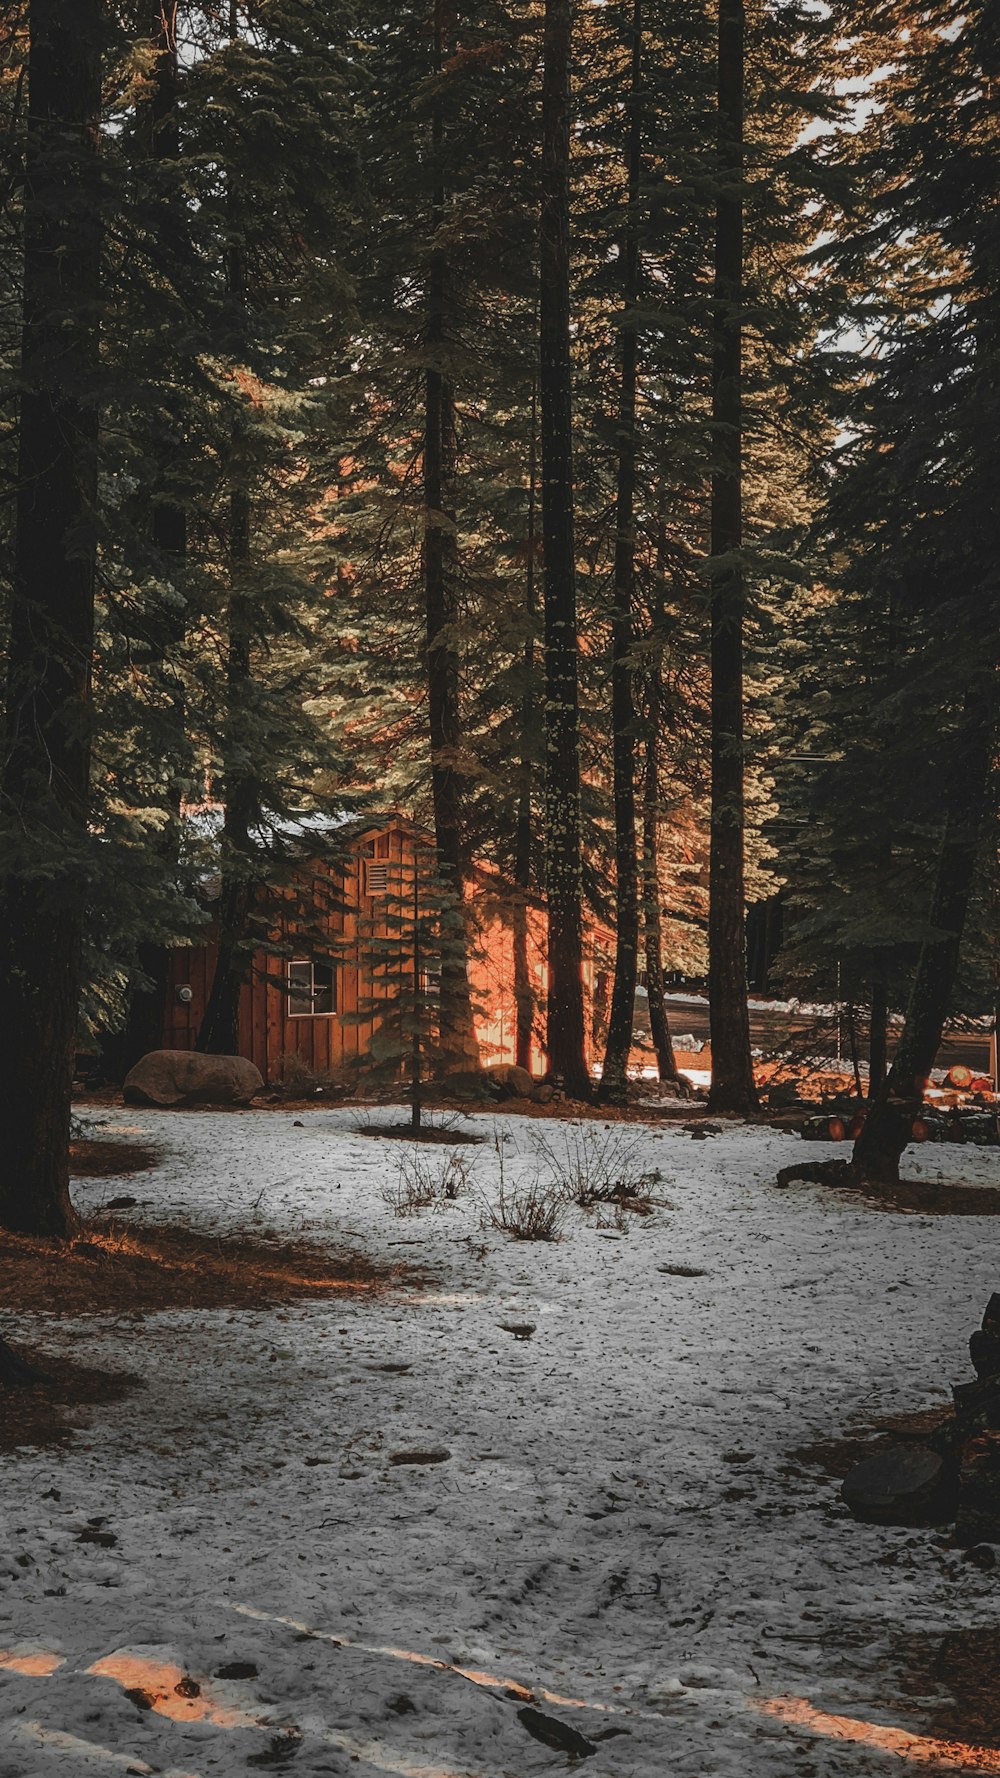 brown house in the middle of forest during daytime